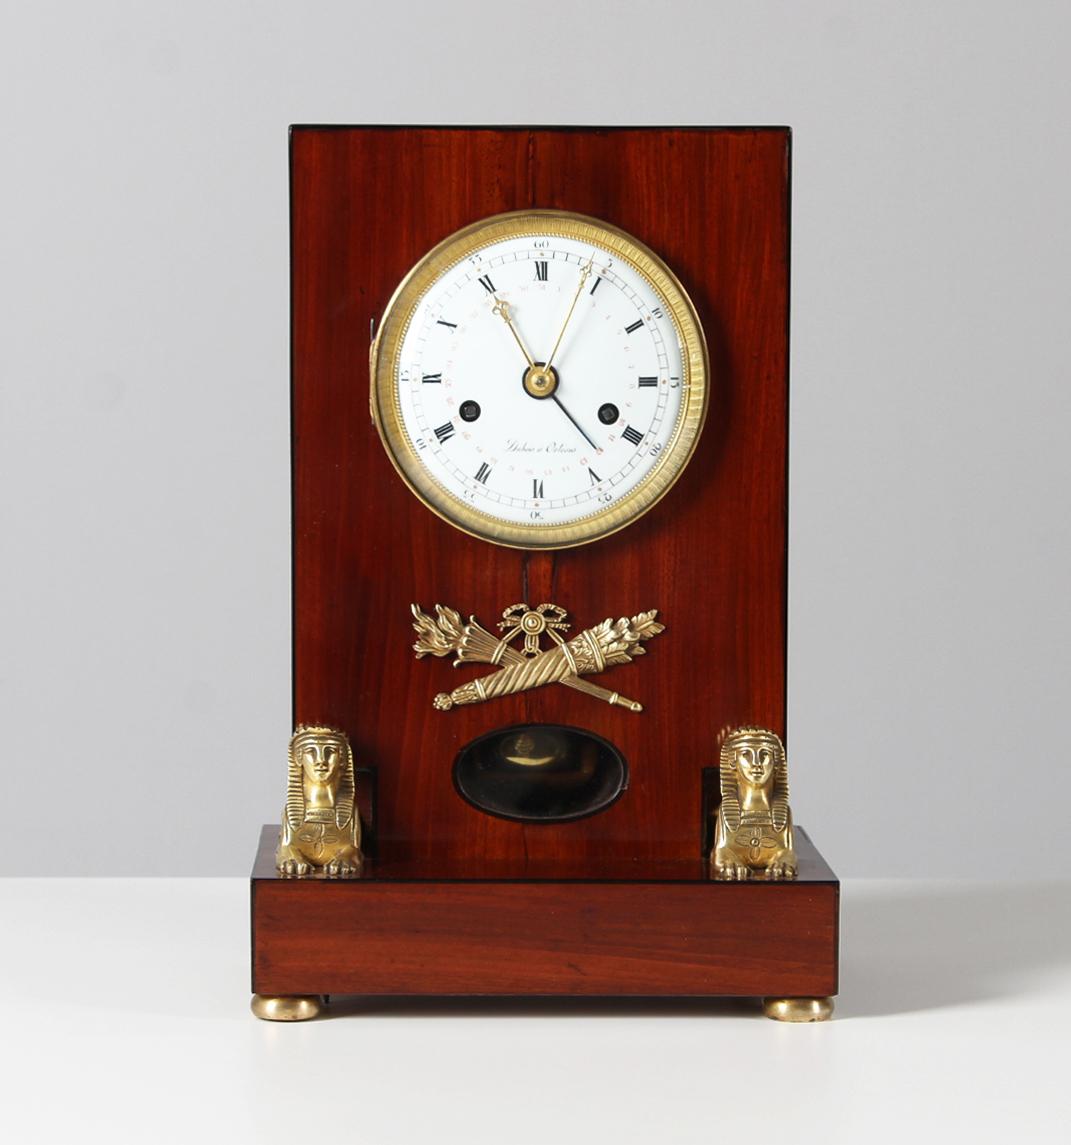 Empire mantel clock with calendar

France
mahogany
early 19th century

Dimensions: H x W x D: 35 x 24 x 17 cm

Description:
Beautiful antique Empire mantel clock in mahogany case. So-called Pendule d'Audience.

Pedestal standing on four